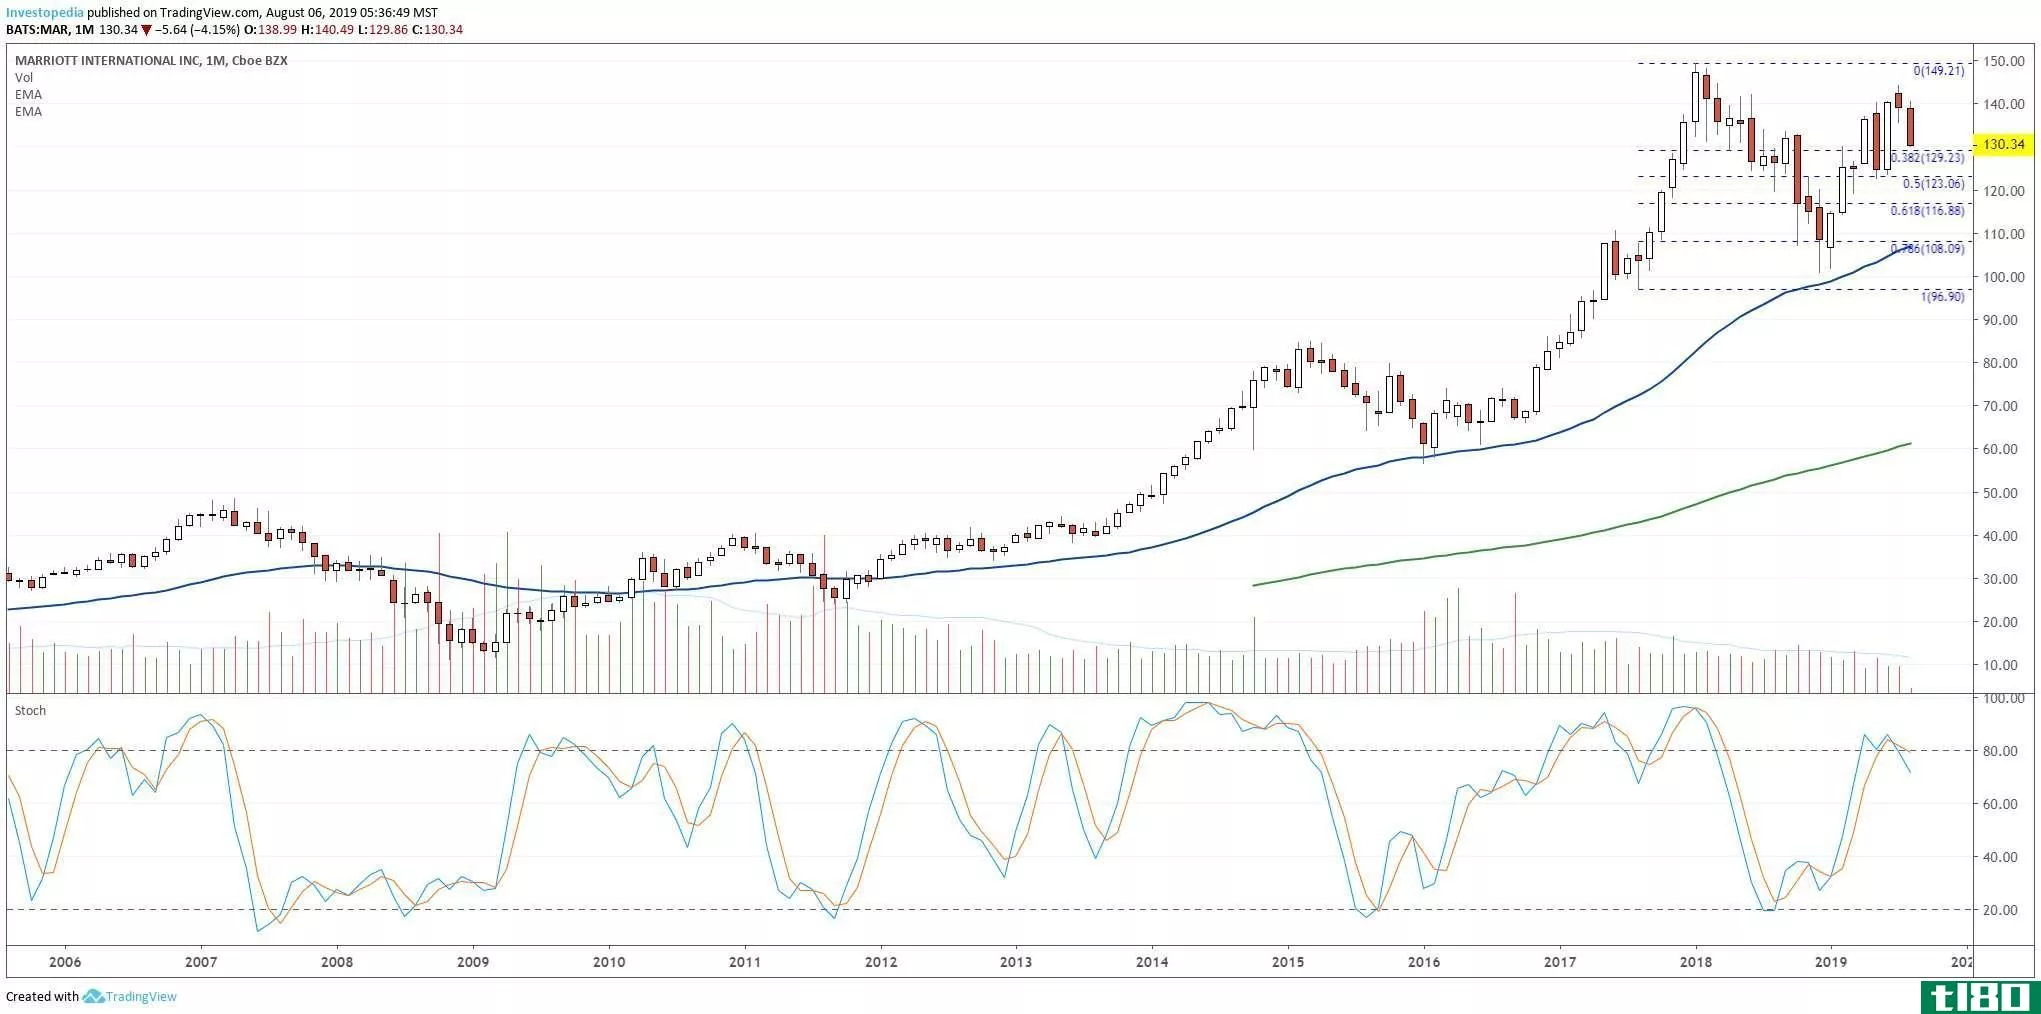 Long-term chart showing the share price performance of Marriott International, Inc. (MAR)